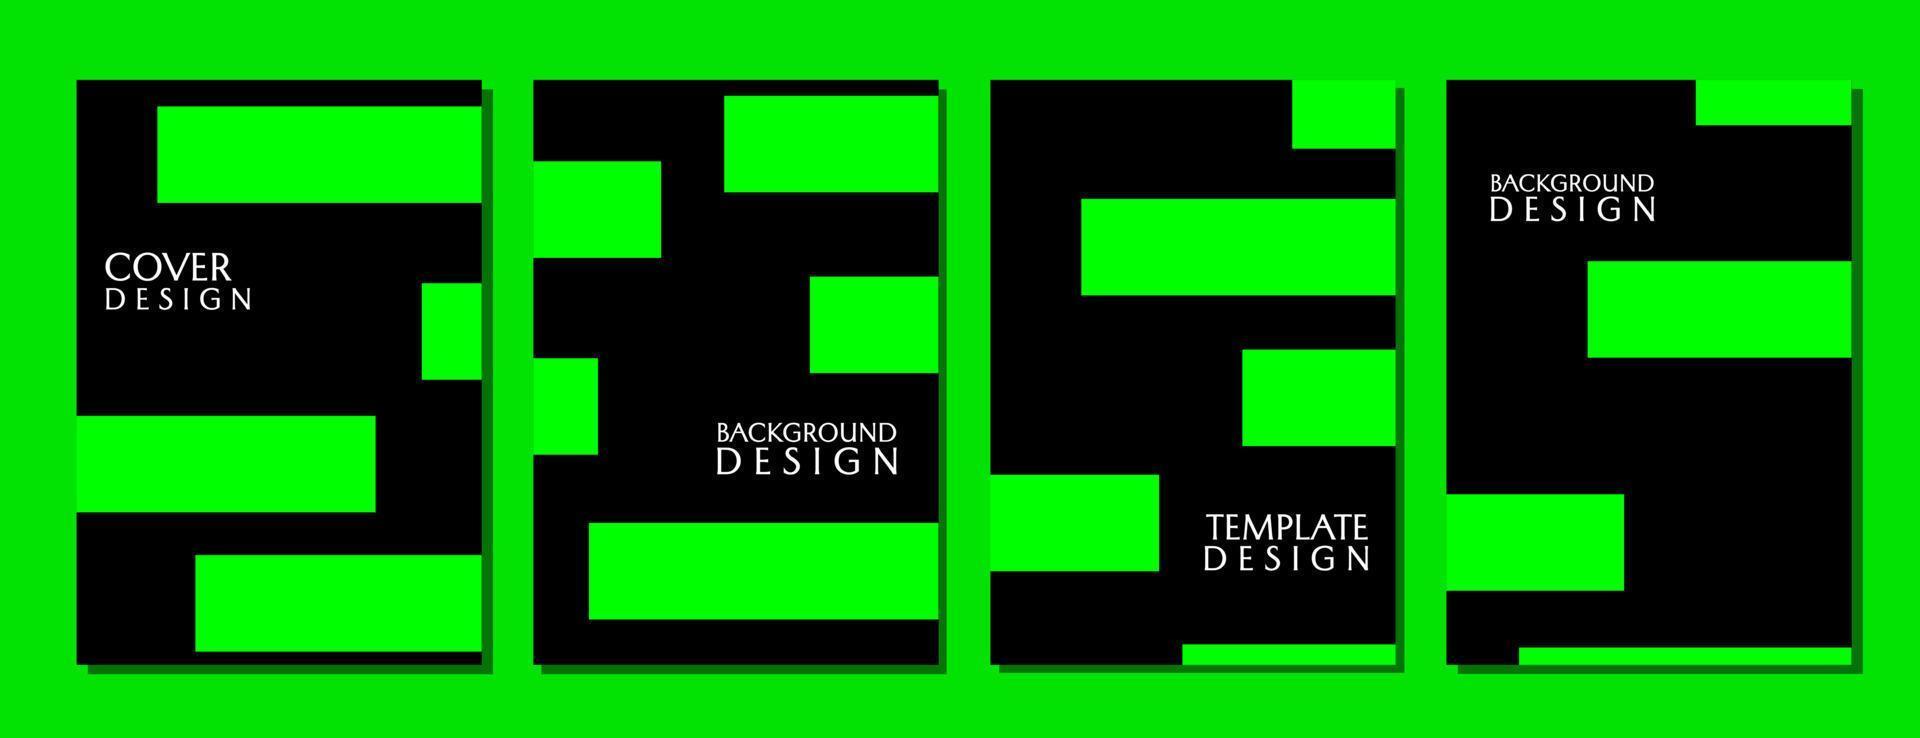 vector design. set of minimalist abstract cover templates. background with a blend of black and green. design for books, magazines, catalogs